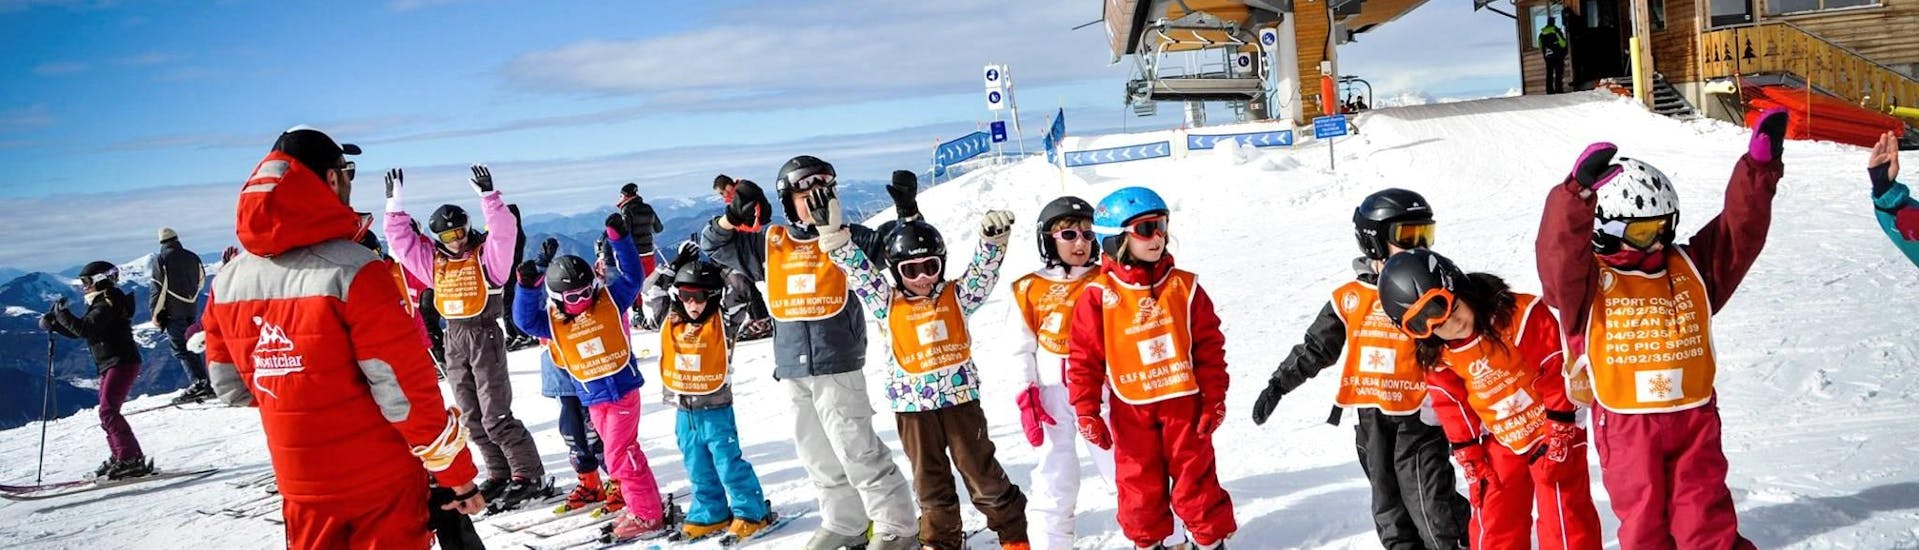 Kids are happy to take part in ski lessons with the ski school ESF Montclar.